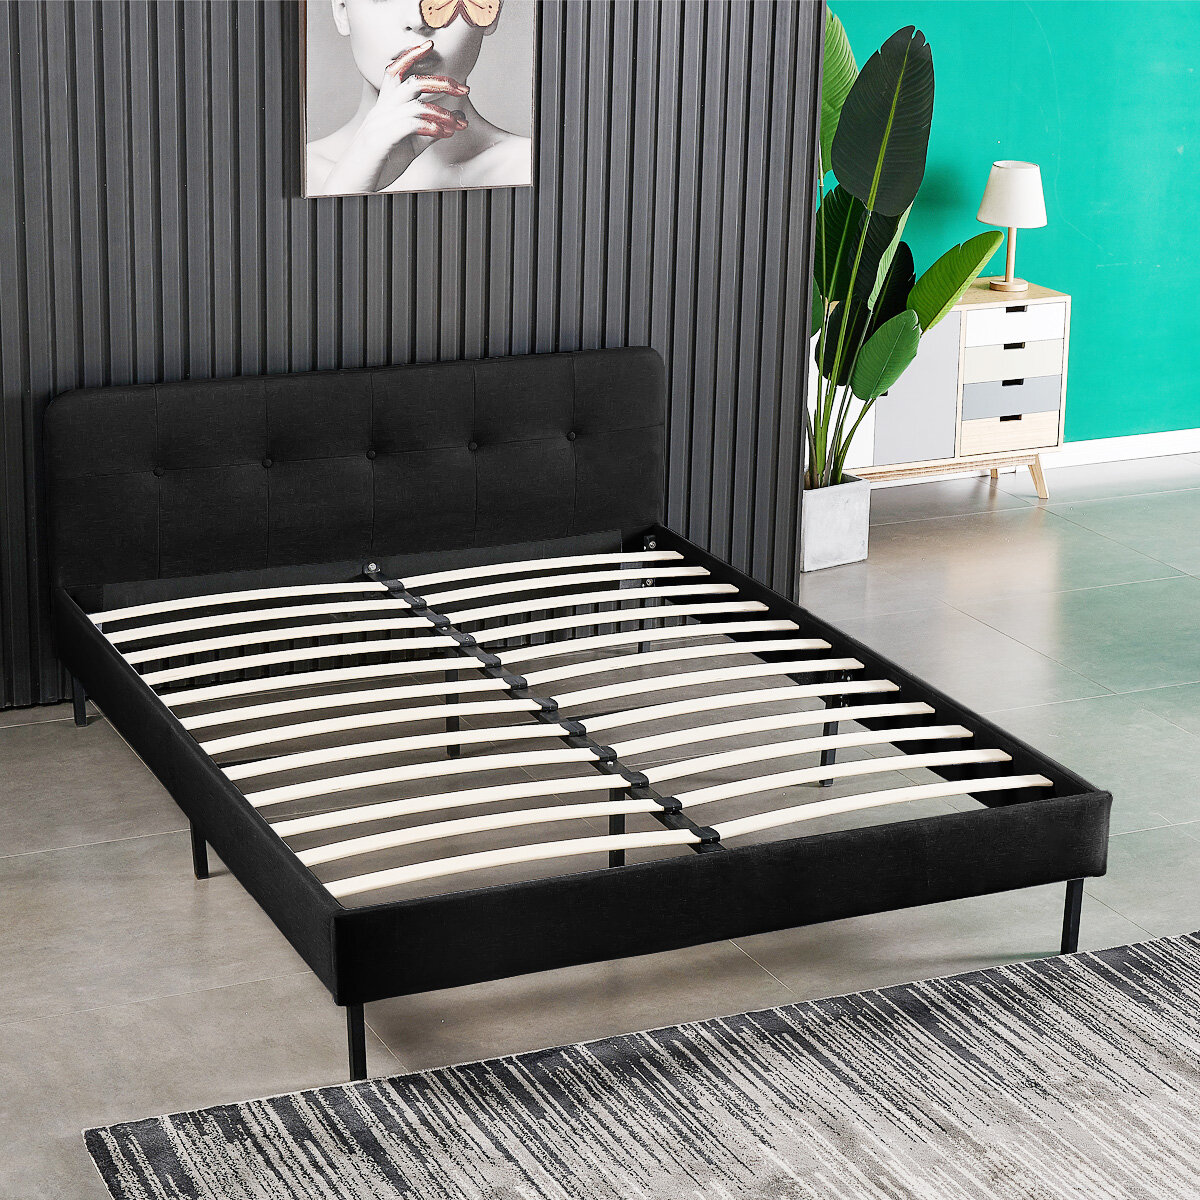 Image of Lusimo Metal Wood Upholstered Platform Bed Queen Size Frame Panel Headboard No Box Spring Needed Easy Installation 83x63